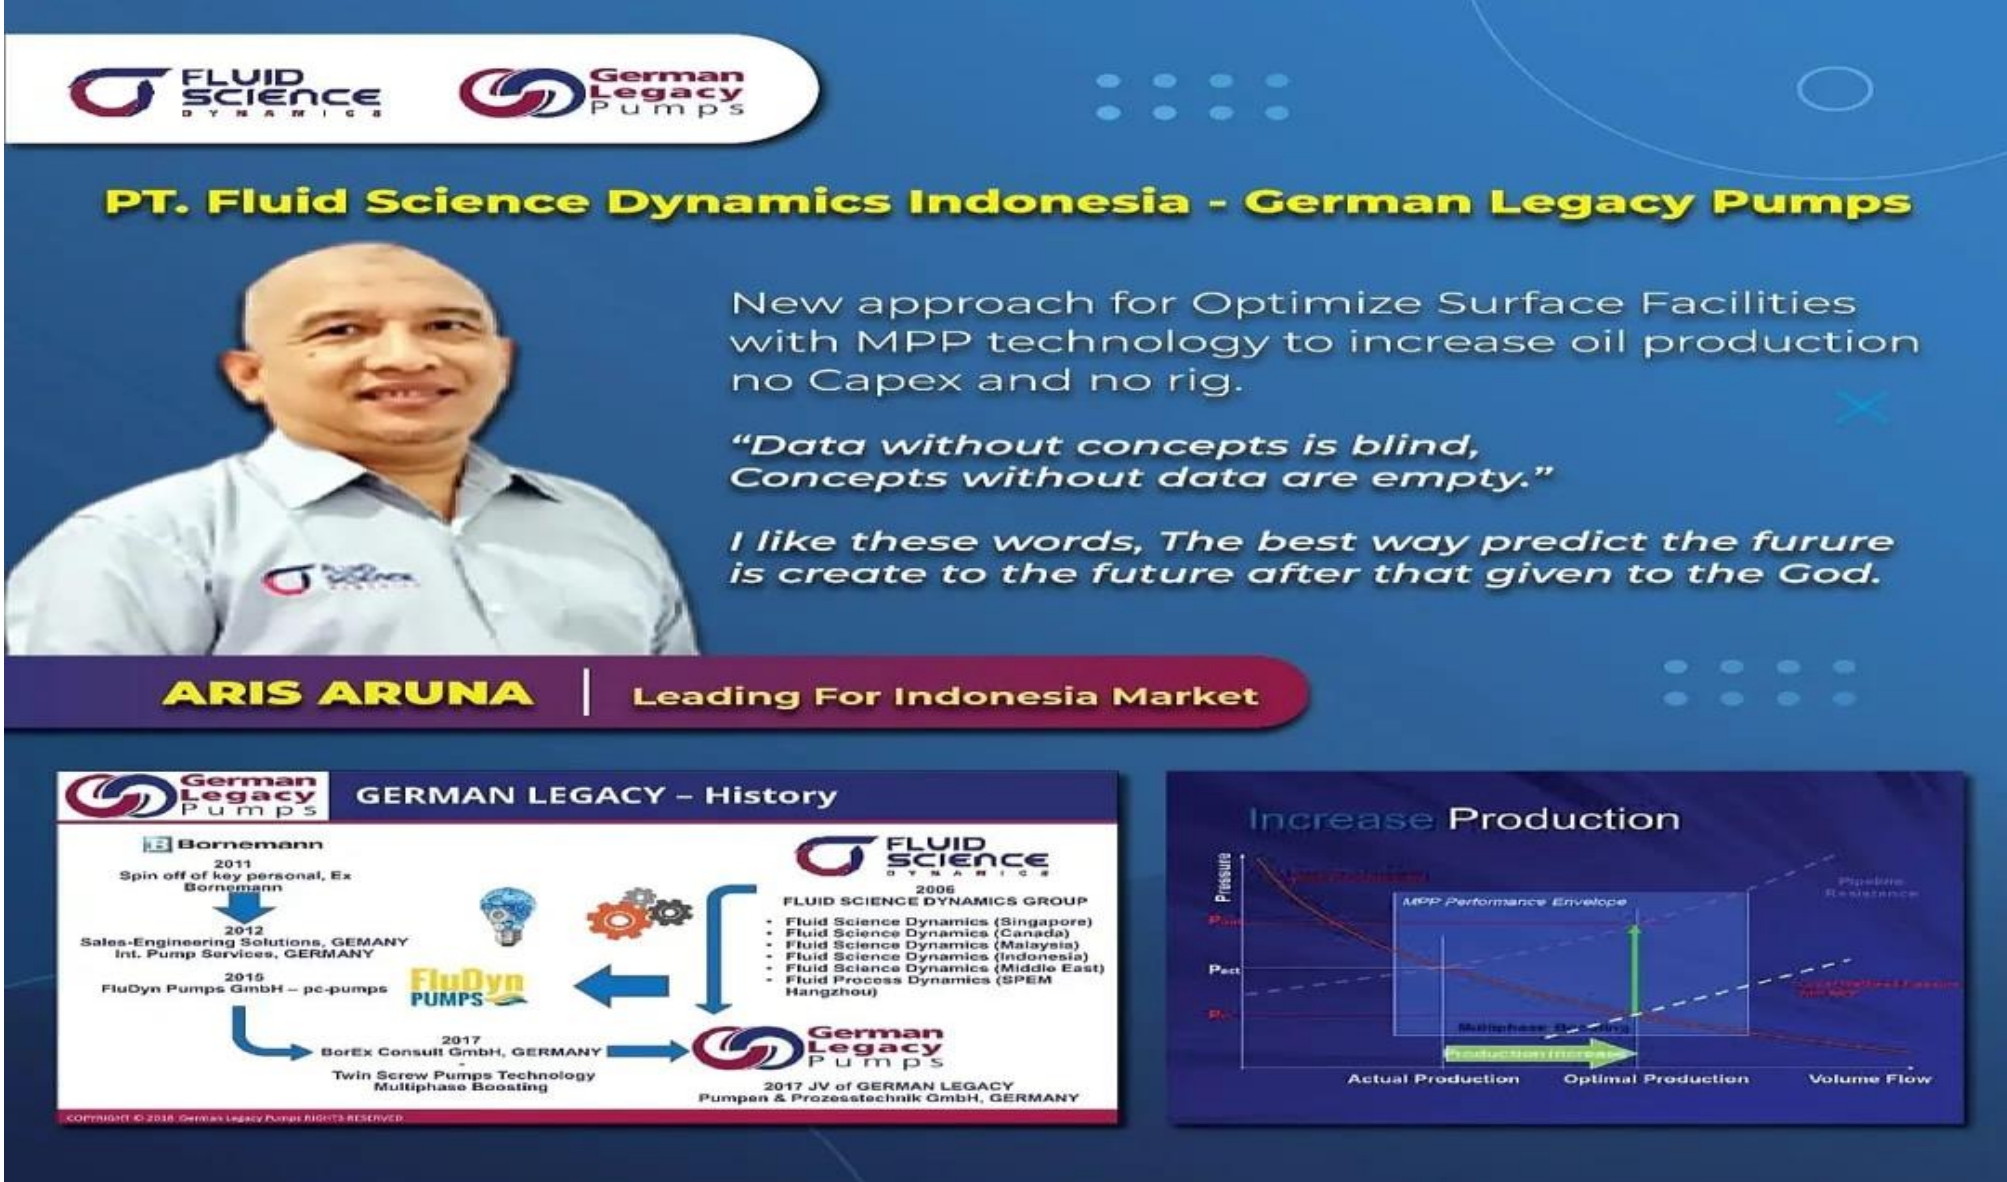 PT. Fluid Science Dynamics Indonesia Menawarkan Technology Multiphase Pump